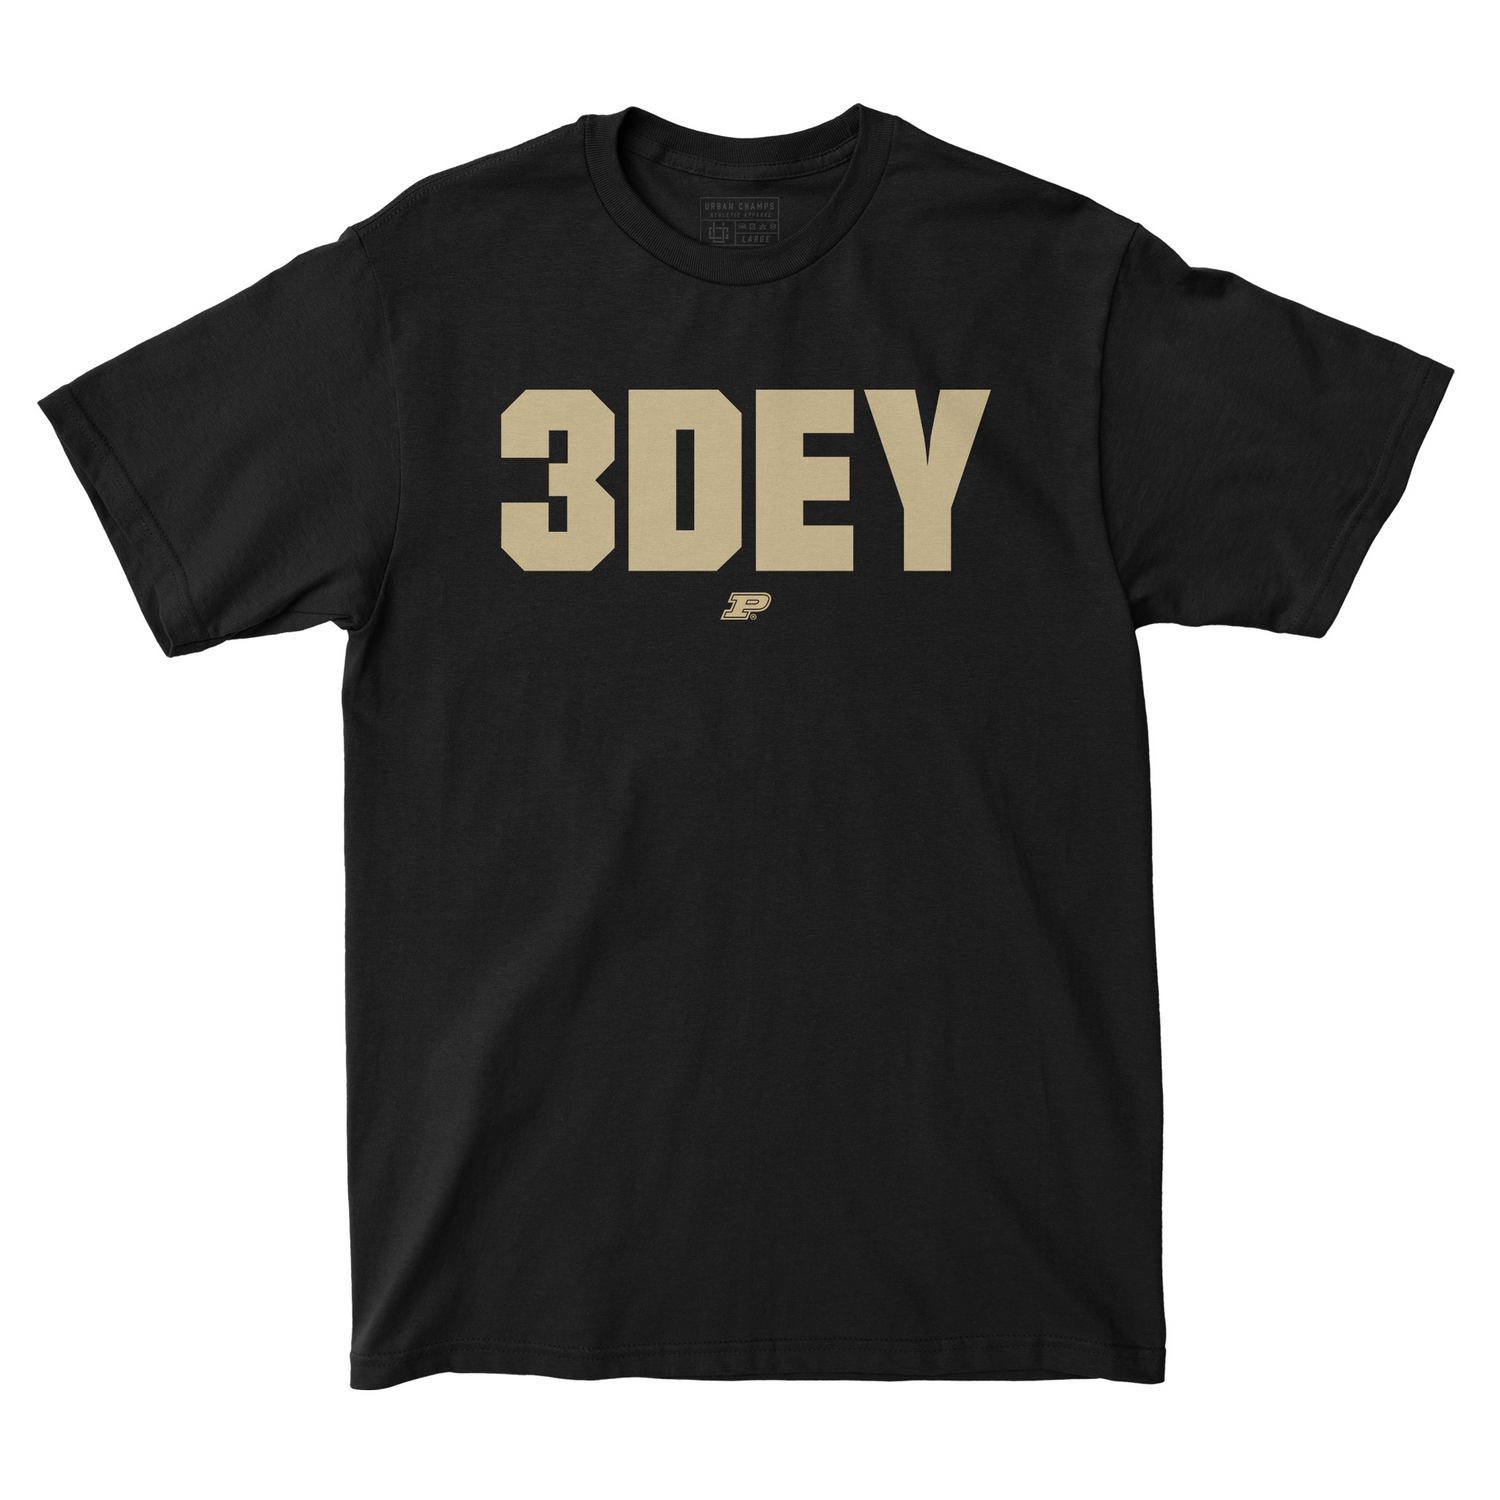 THE 3DEY COLLECTION